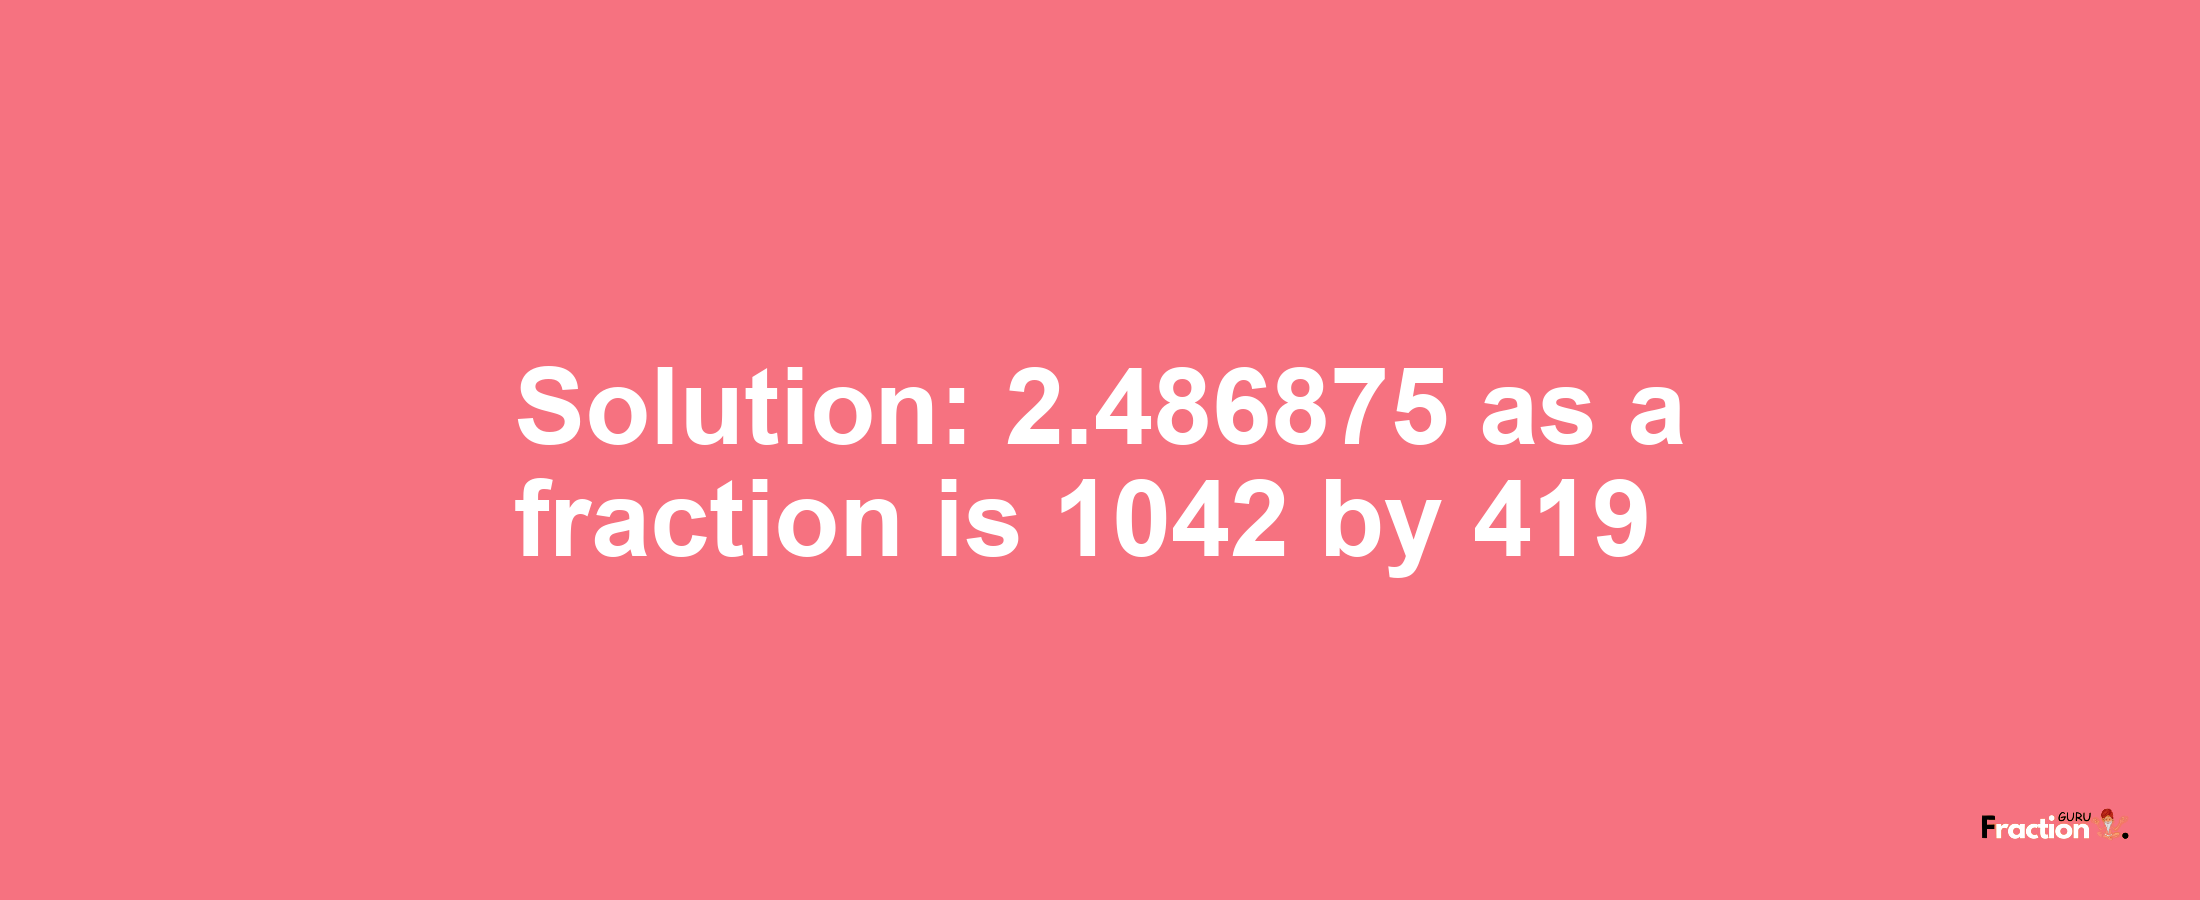 Solution:2.486875 as a fraction is 1042/419